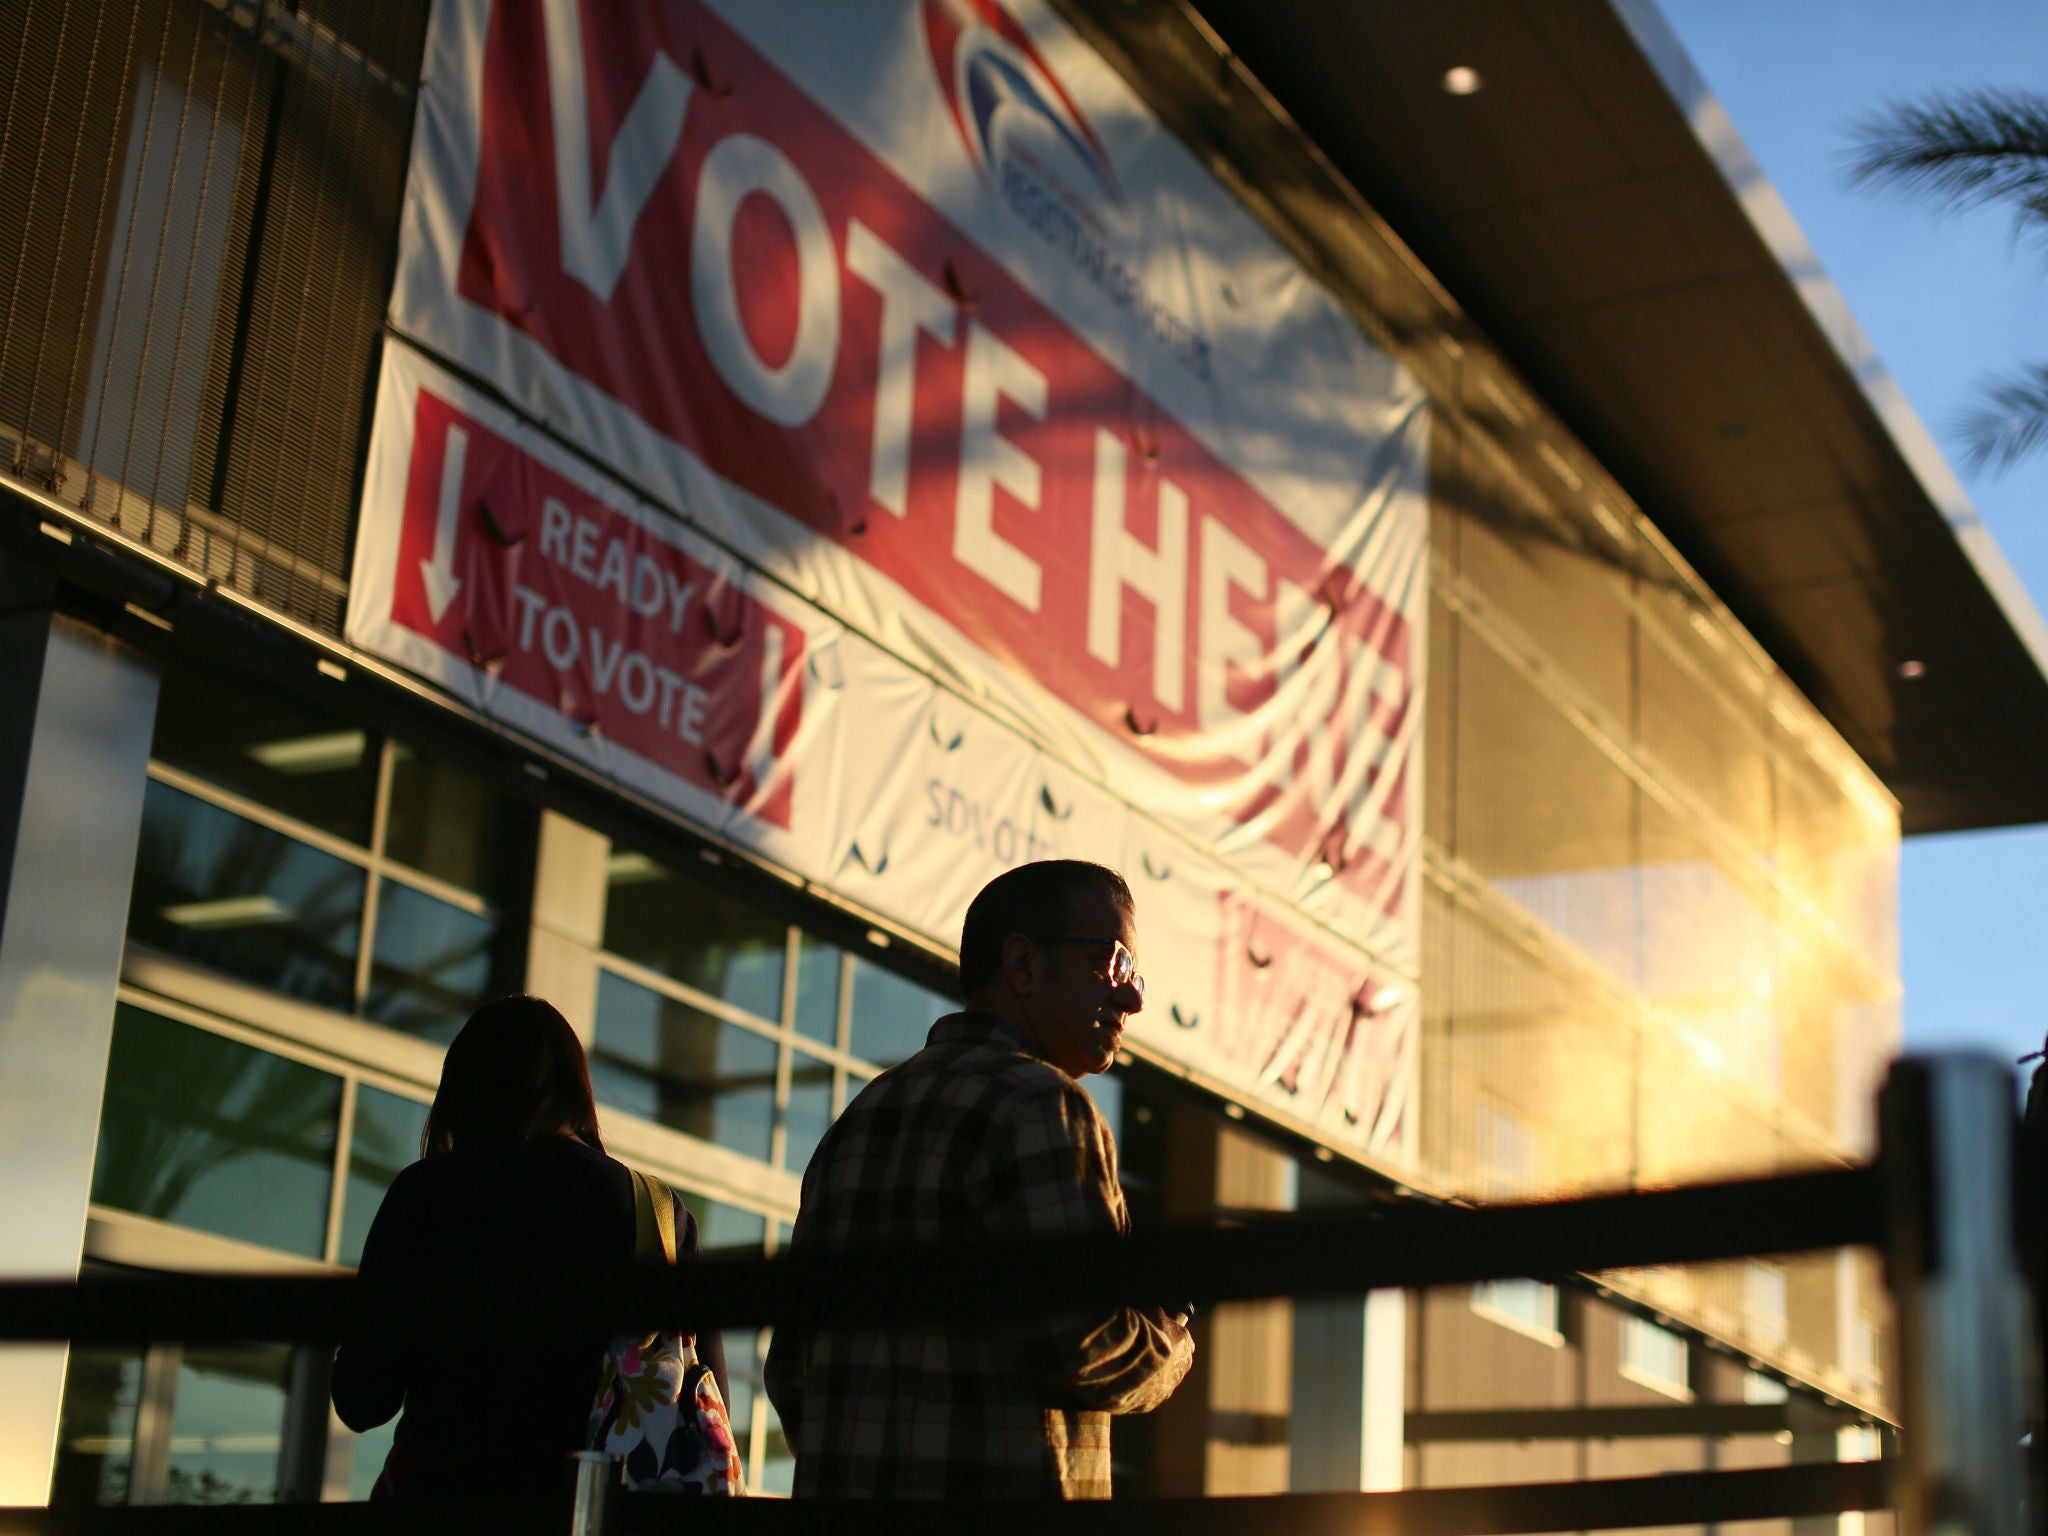 Voters wait in line at the San Diego County Registrar of Voters during the 2016 presidential election